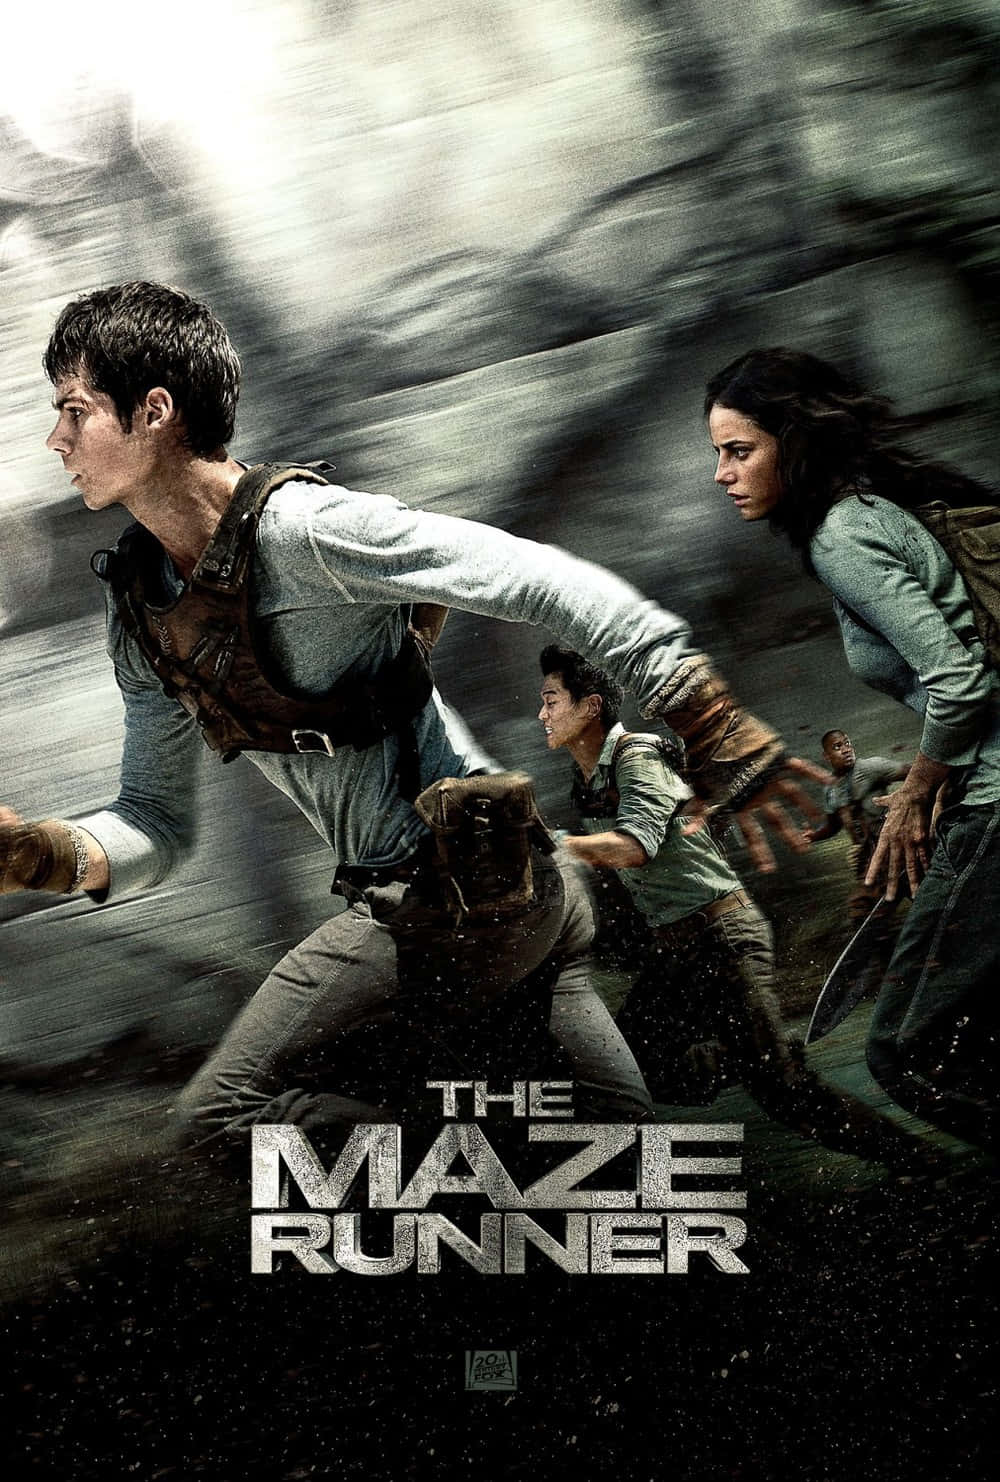 Thomas and the Gladers race against time in the epic Maze Runner adventure.